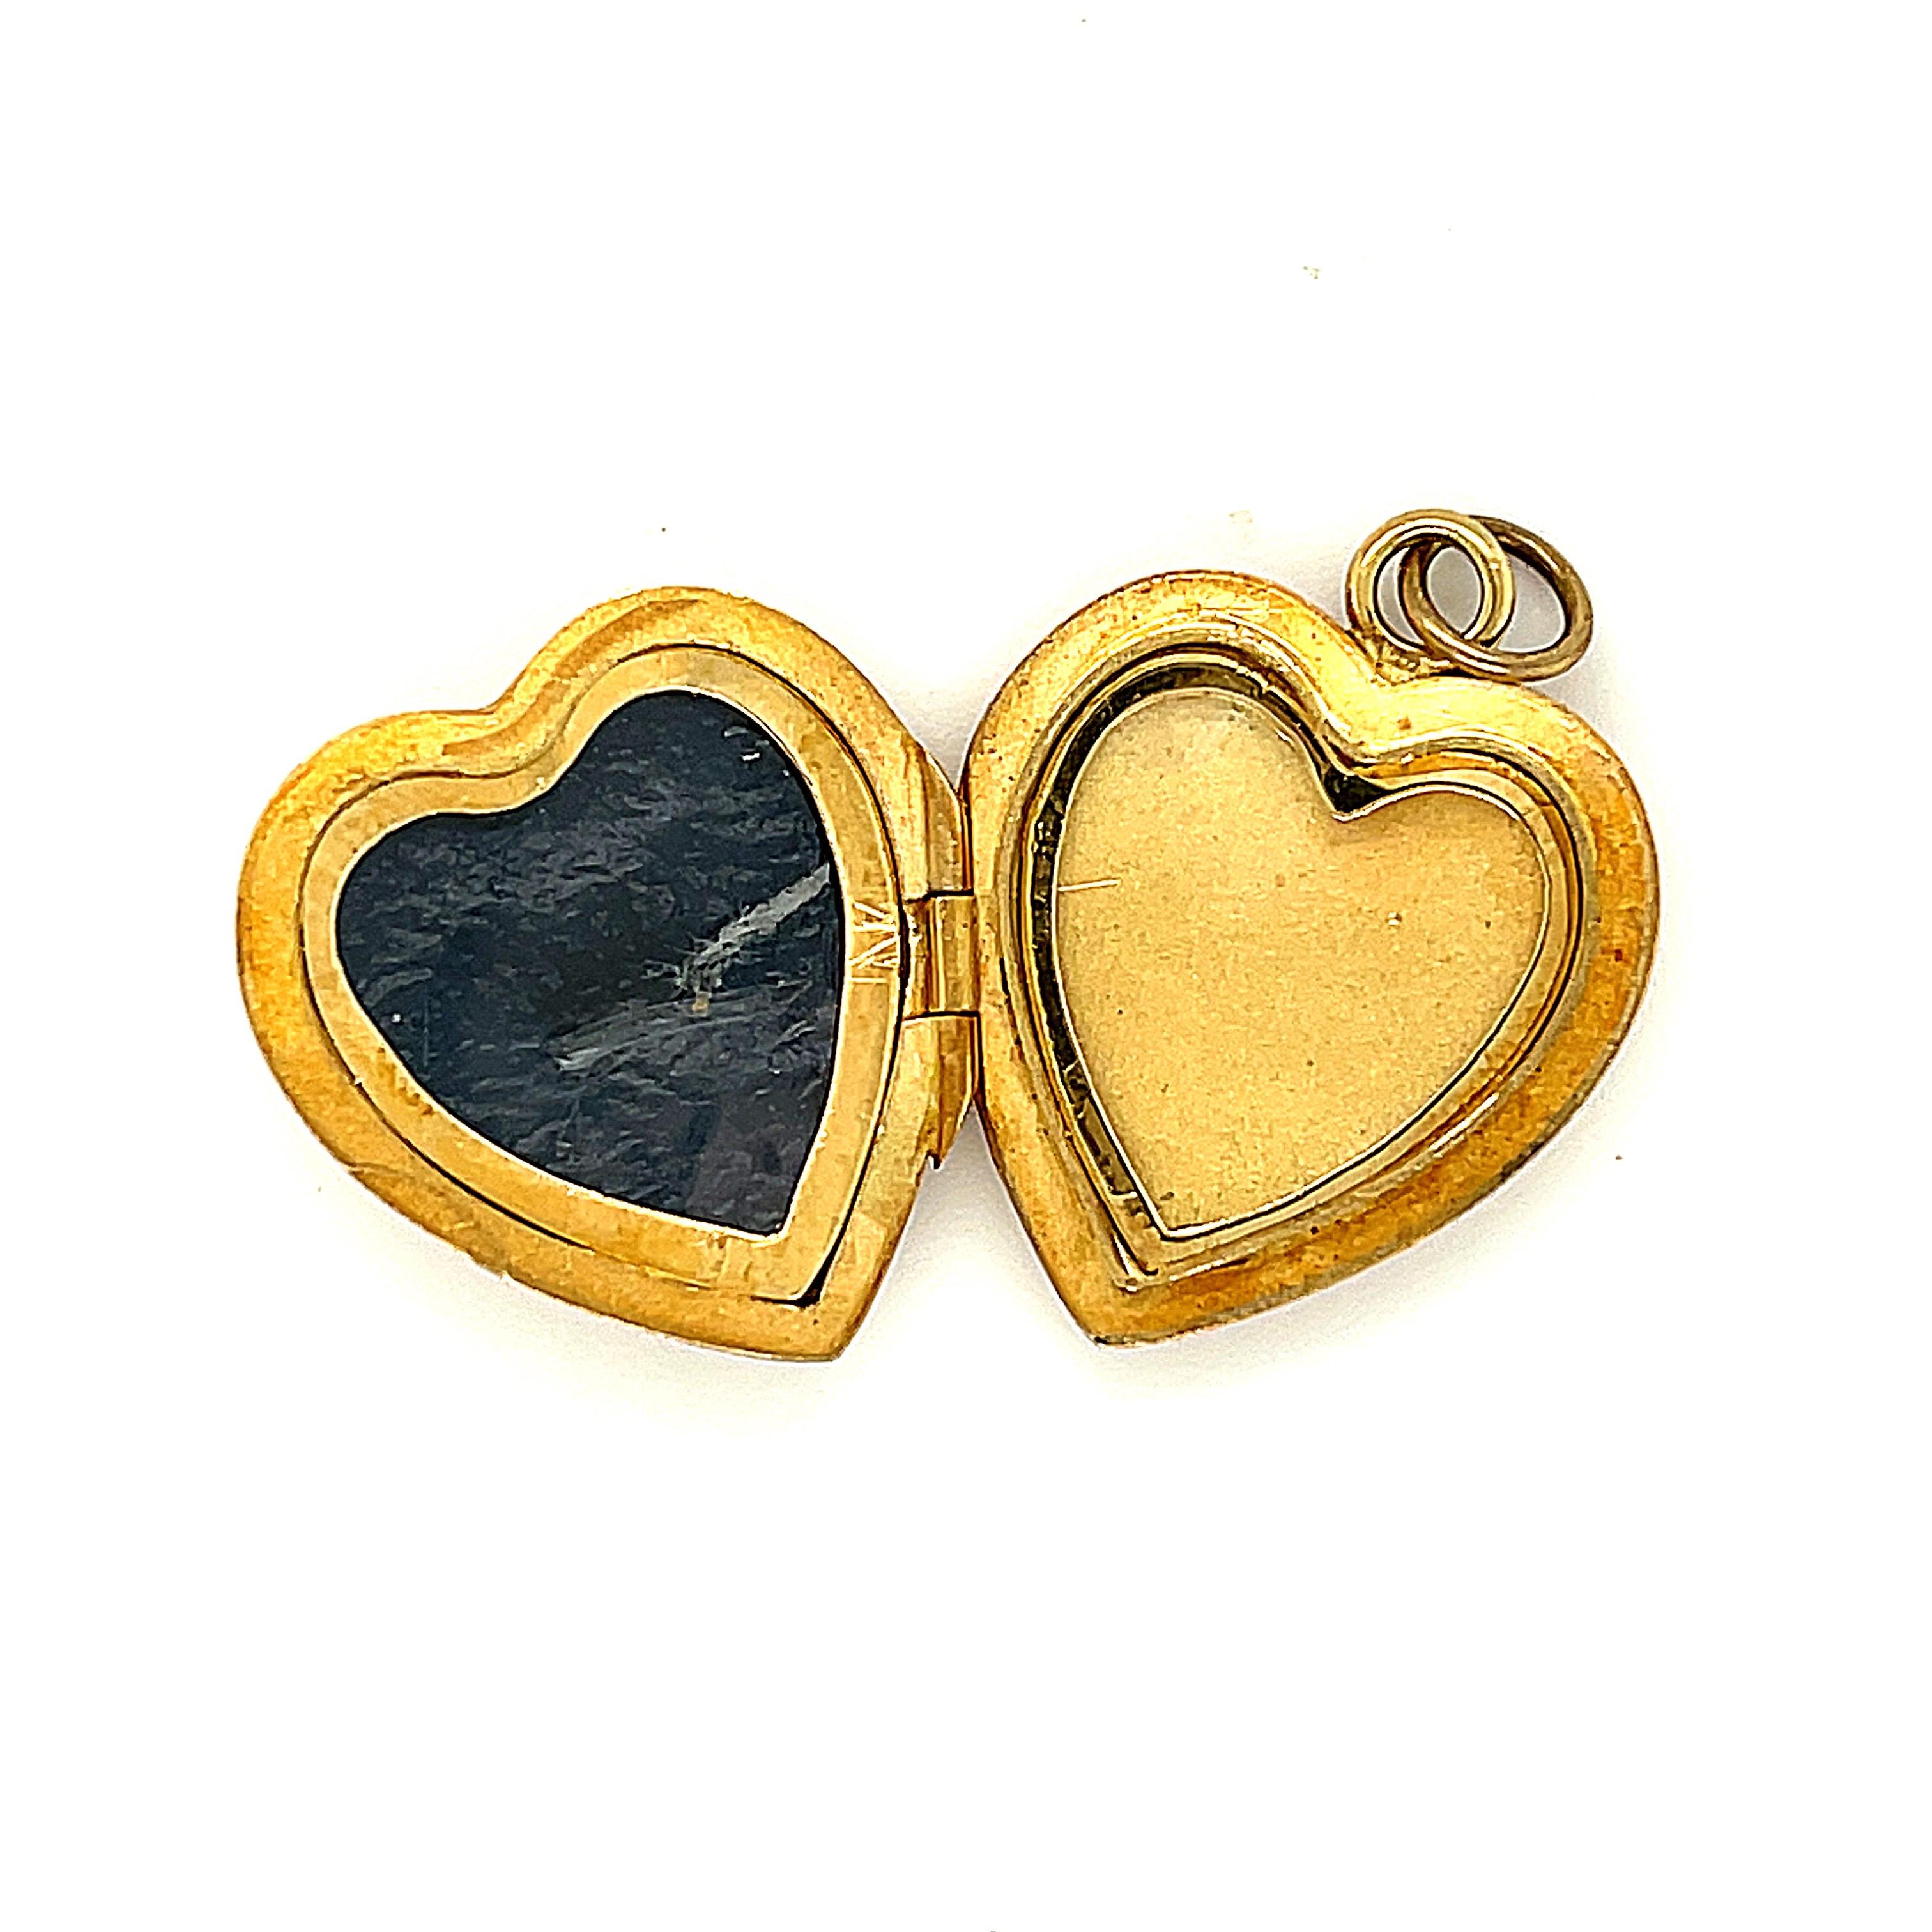 Charming vintage 18k gold heart locket that opens with a pave diamond heart on the front of the locket, circa 1980. The locket has English hallmarks on the back side of the heart. The heart opens and can be hold photos. The locket is set with 32